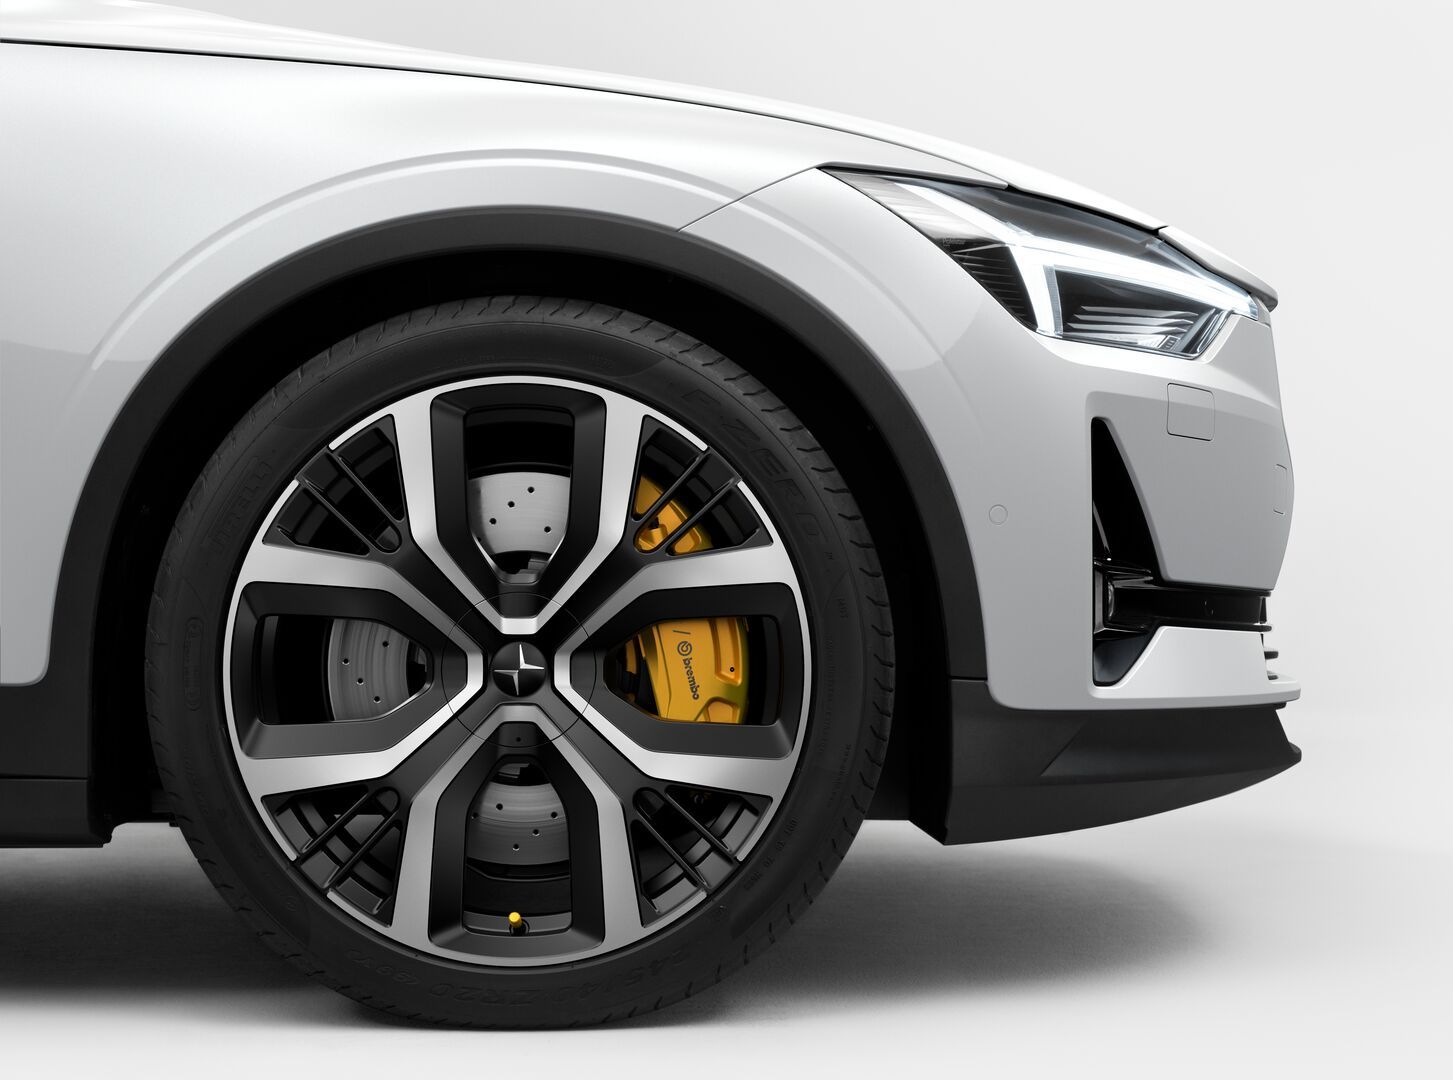 Sideview of the wheels and rims of a white Polestar 2